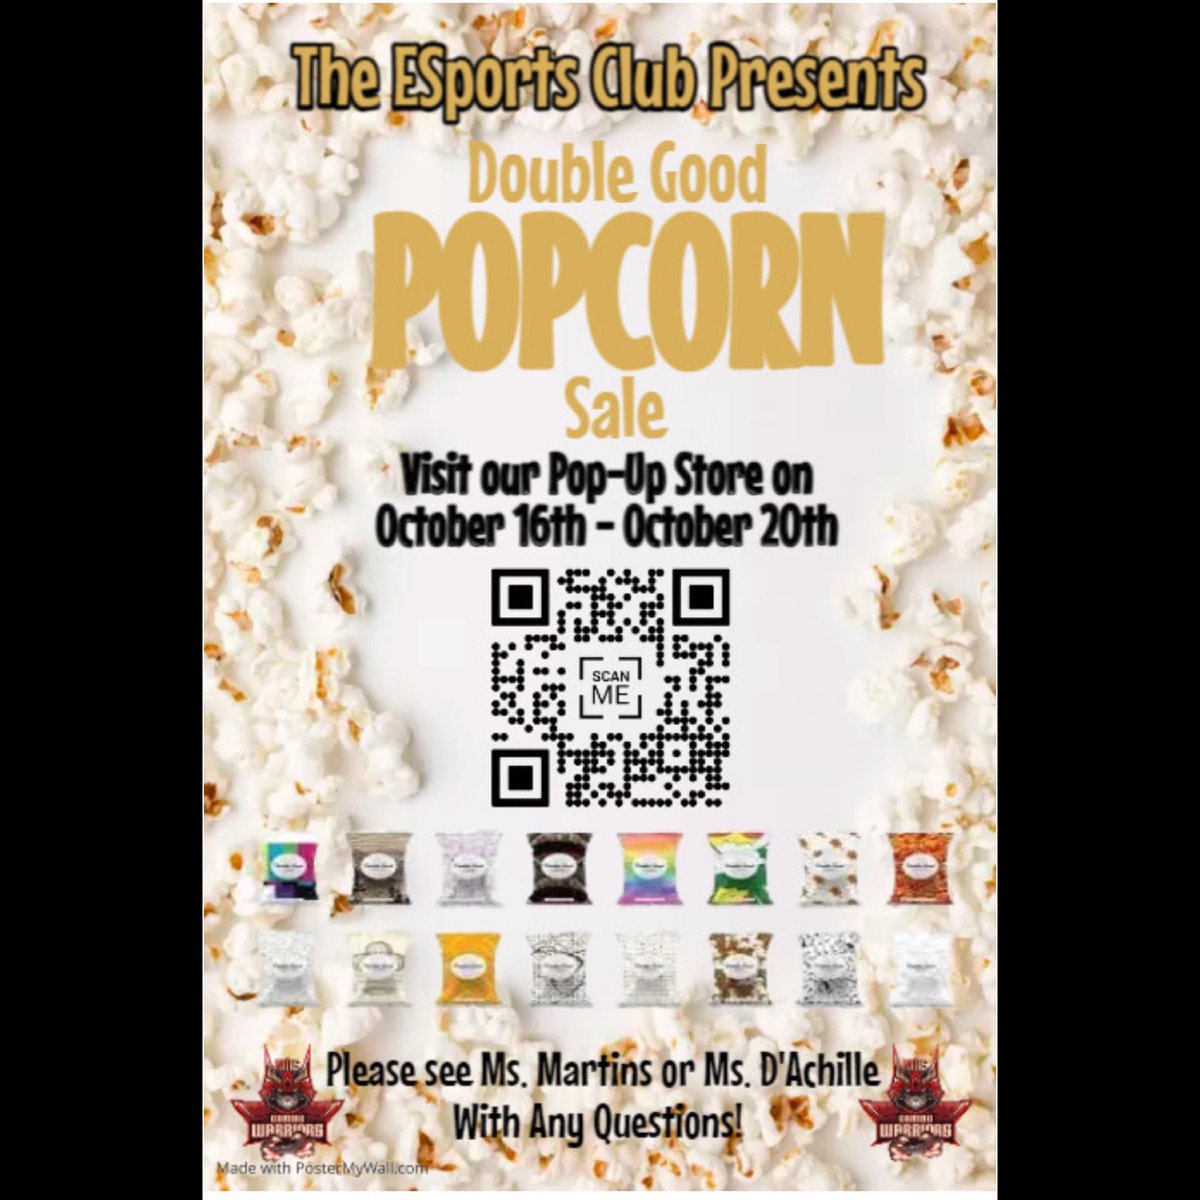 Hey Guys!! Please help support my ESports team by purchasing some Double Good Popcorn or making a donation. We are raising funds in order to compete statewide being that our league is no longer free! Please share the code and spread the word. #backtobackstatechamps🏆